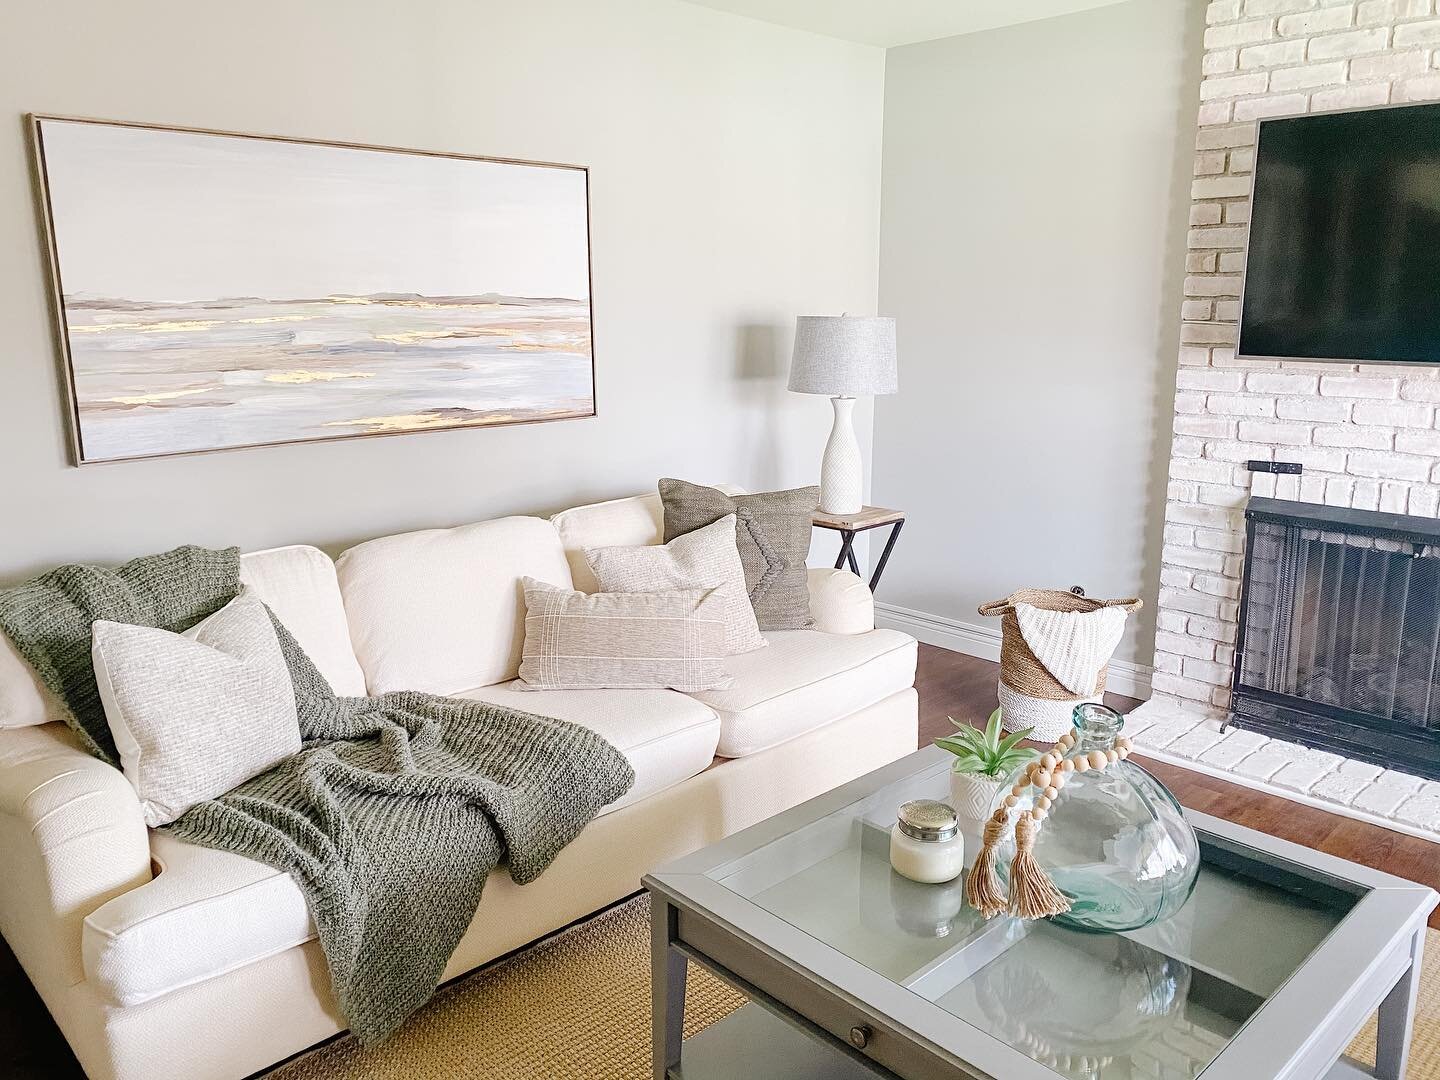 This home is ready! Mixed grays and creams to really warm this space up! #staging #stagingsells #stagingworks #stagedtosell #homestagingworks #homestaging